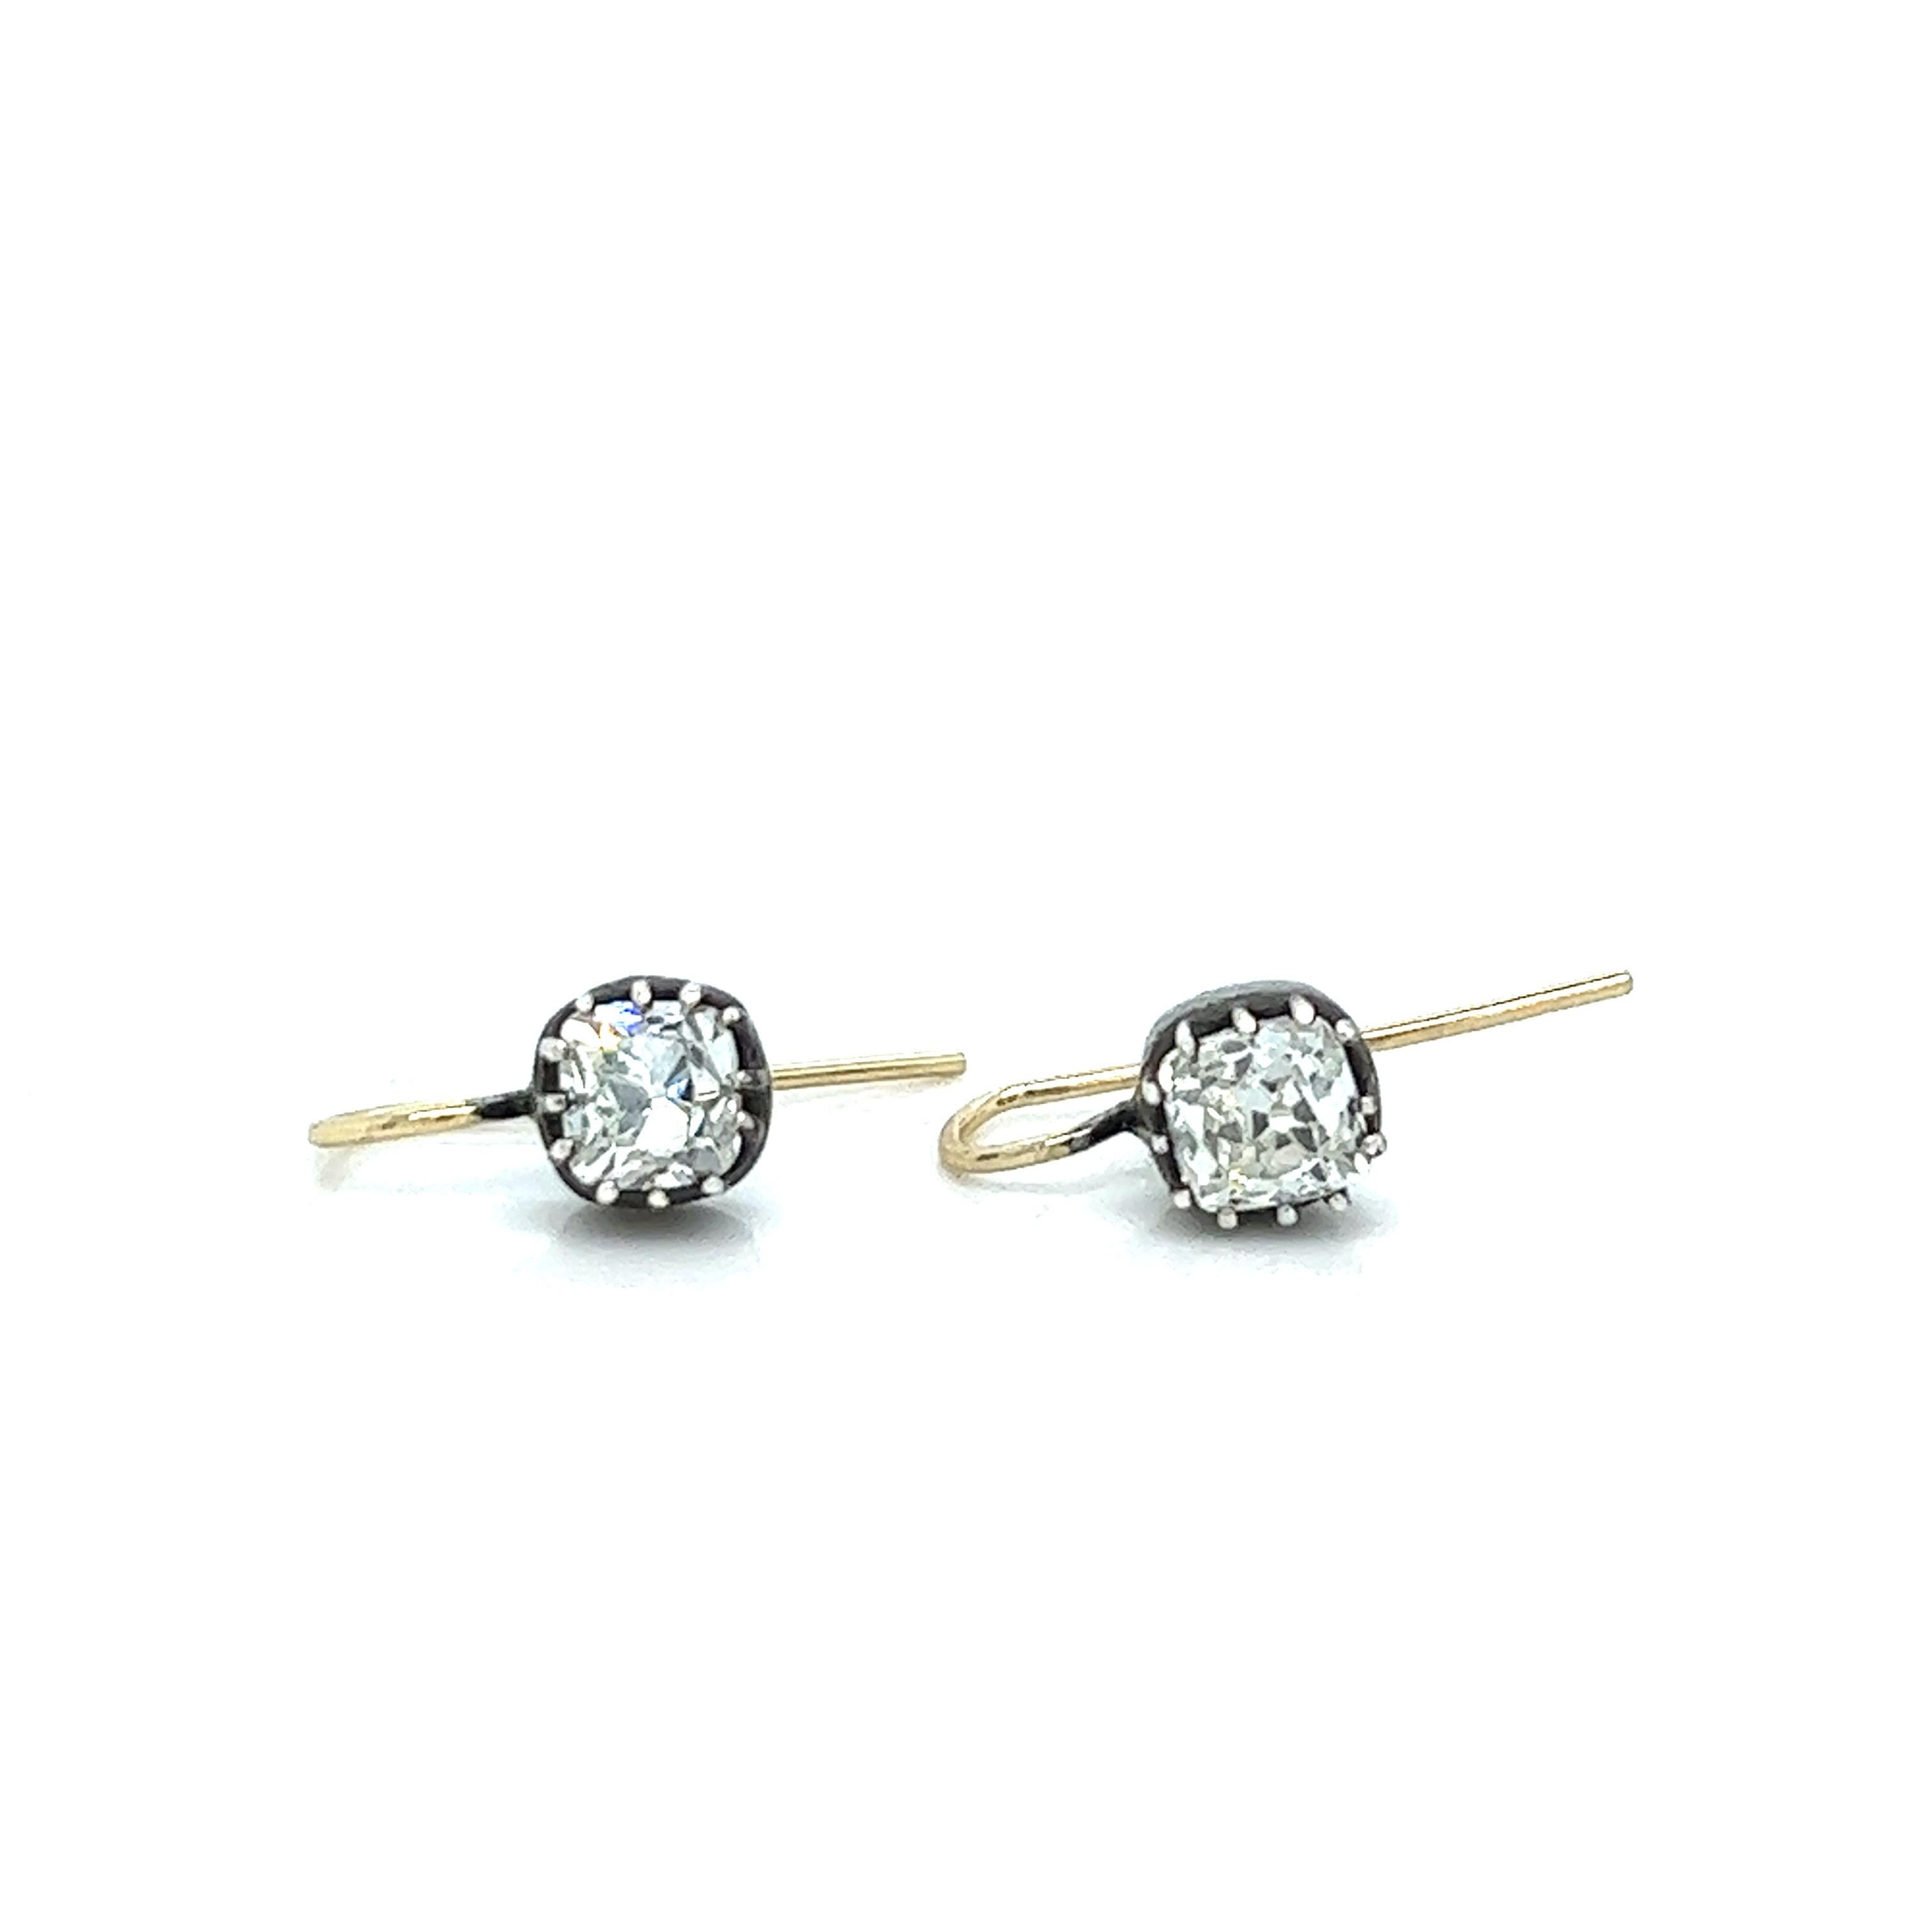 Pair of diamond earrings

Each is set with a square cushion-cut diamond, approximate total weight is over 2 carats 

Total weight: 2.1 grams 